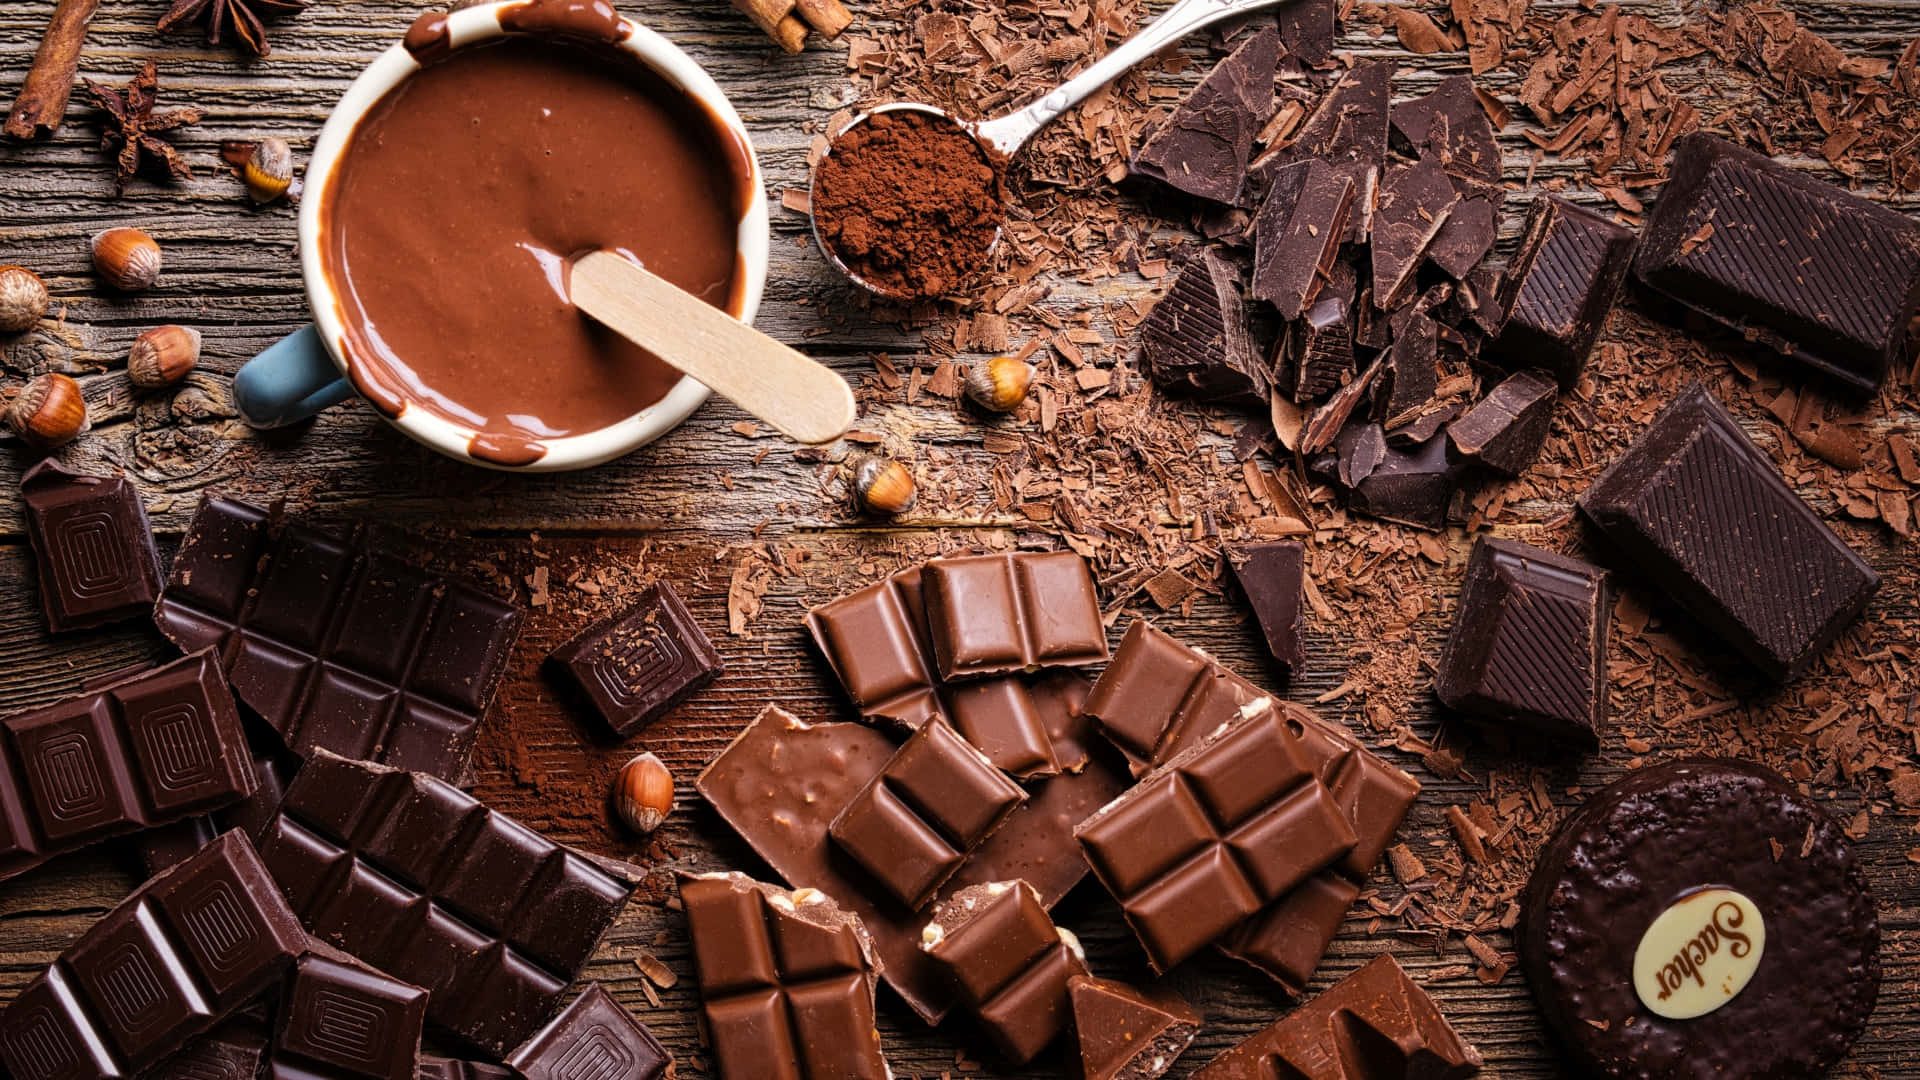 A cup of hot chocolate surrounded by chocolate bars and chocolate powder - Chocolate